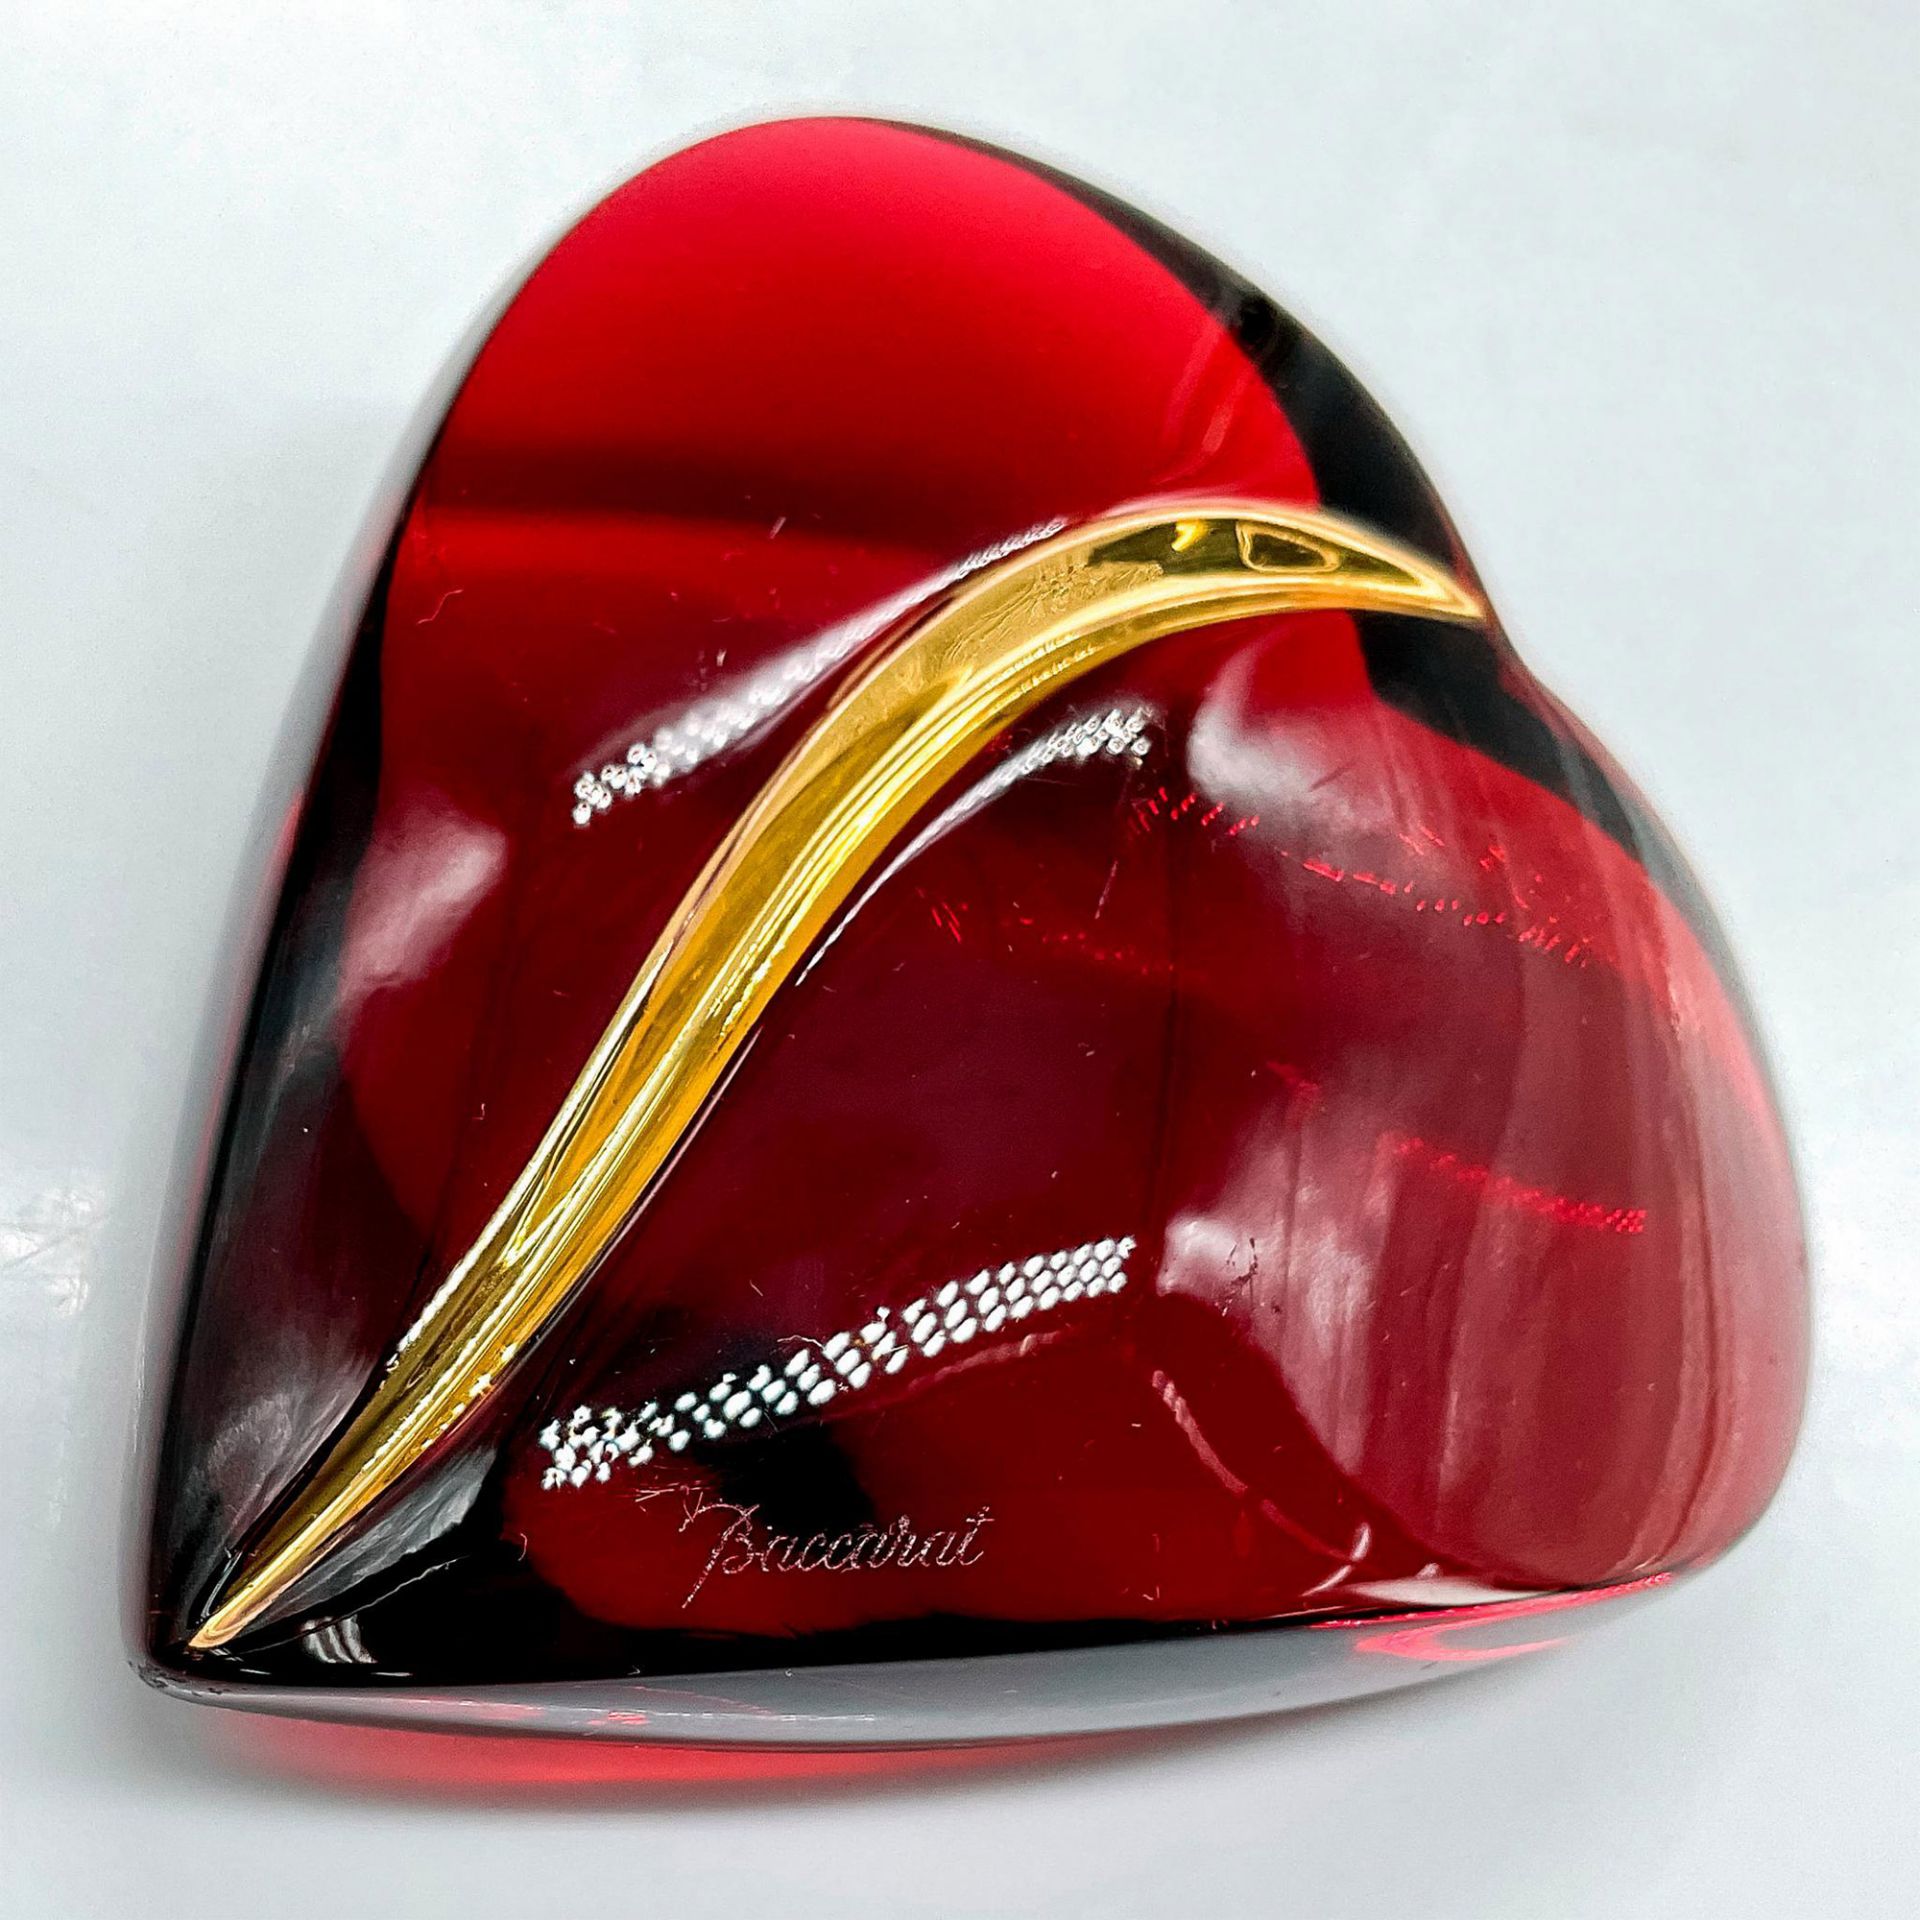 Baccarat Ruby Red Crystal Paperweight, Heart Of Gold - Image 3 of 3